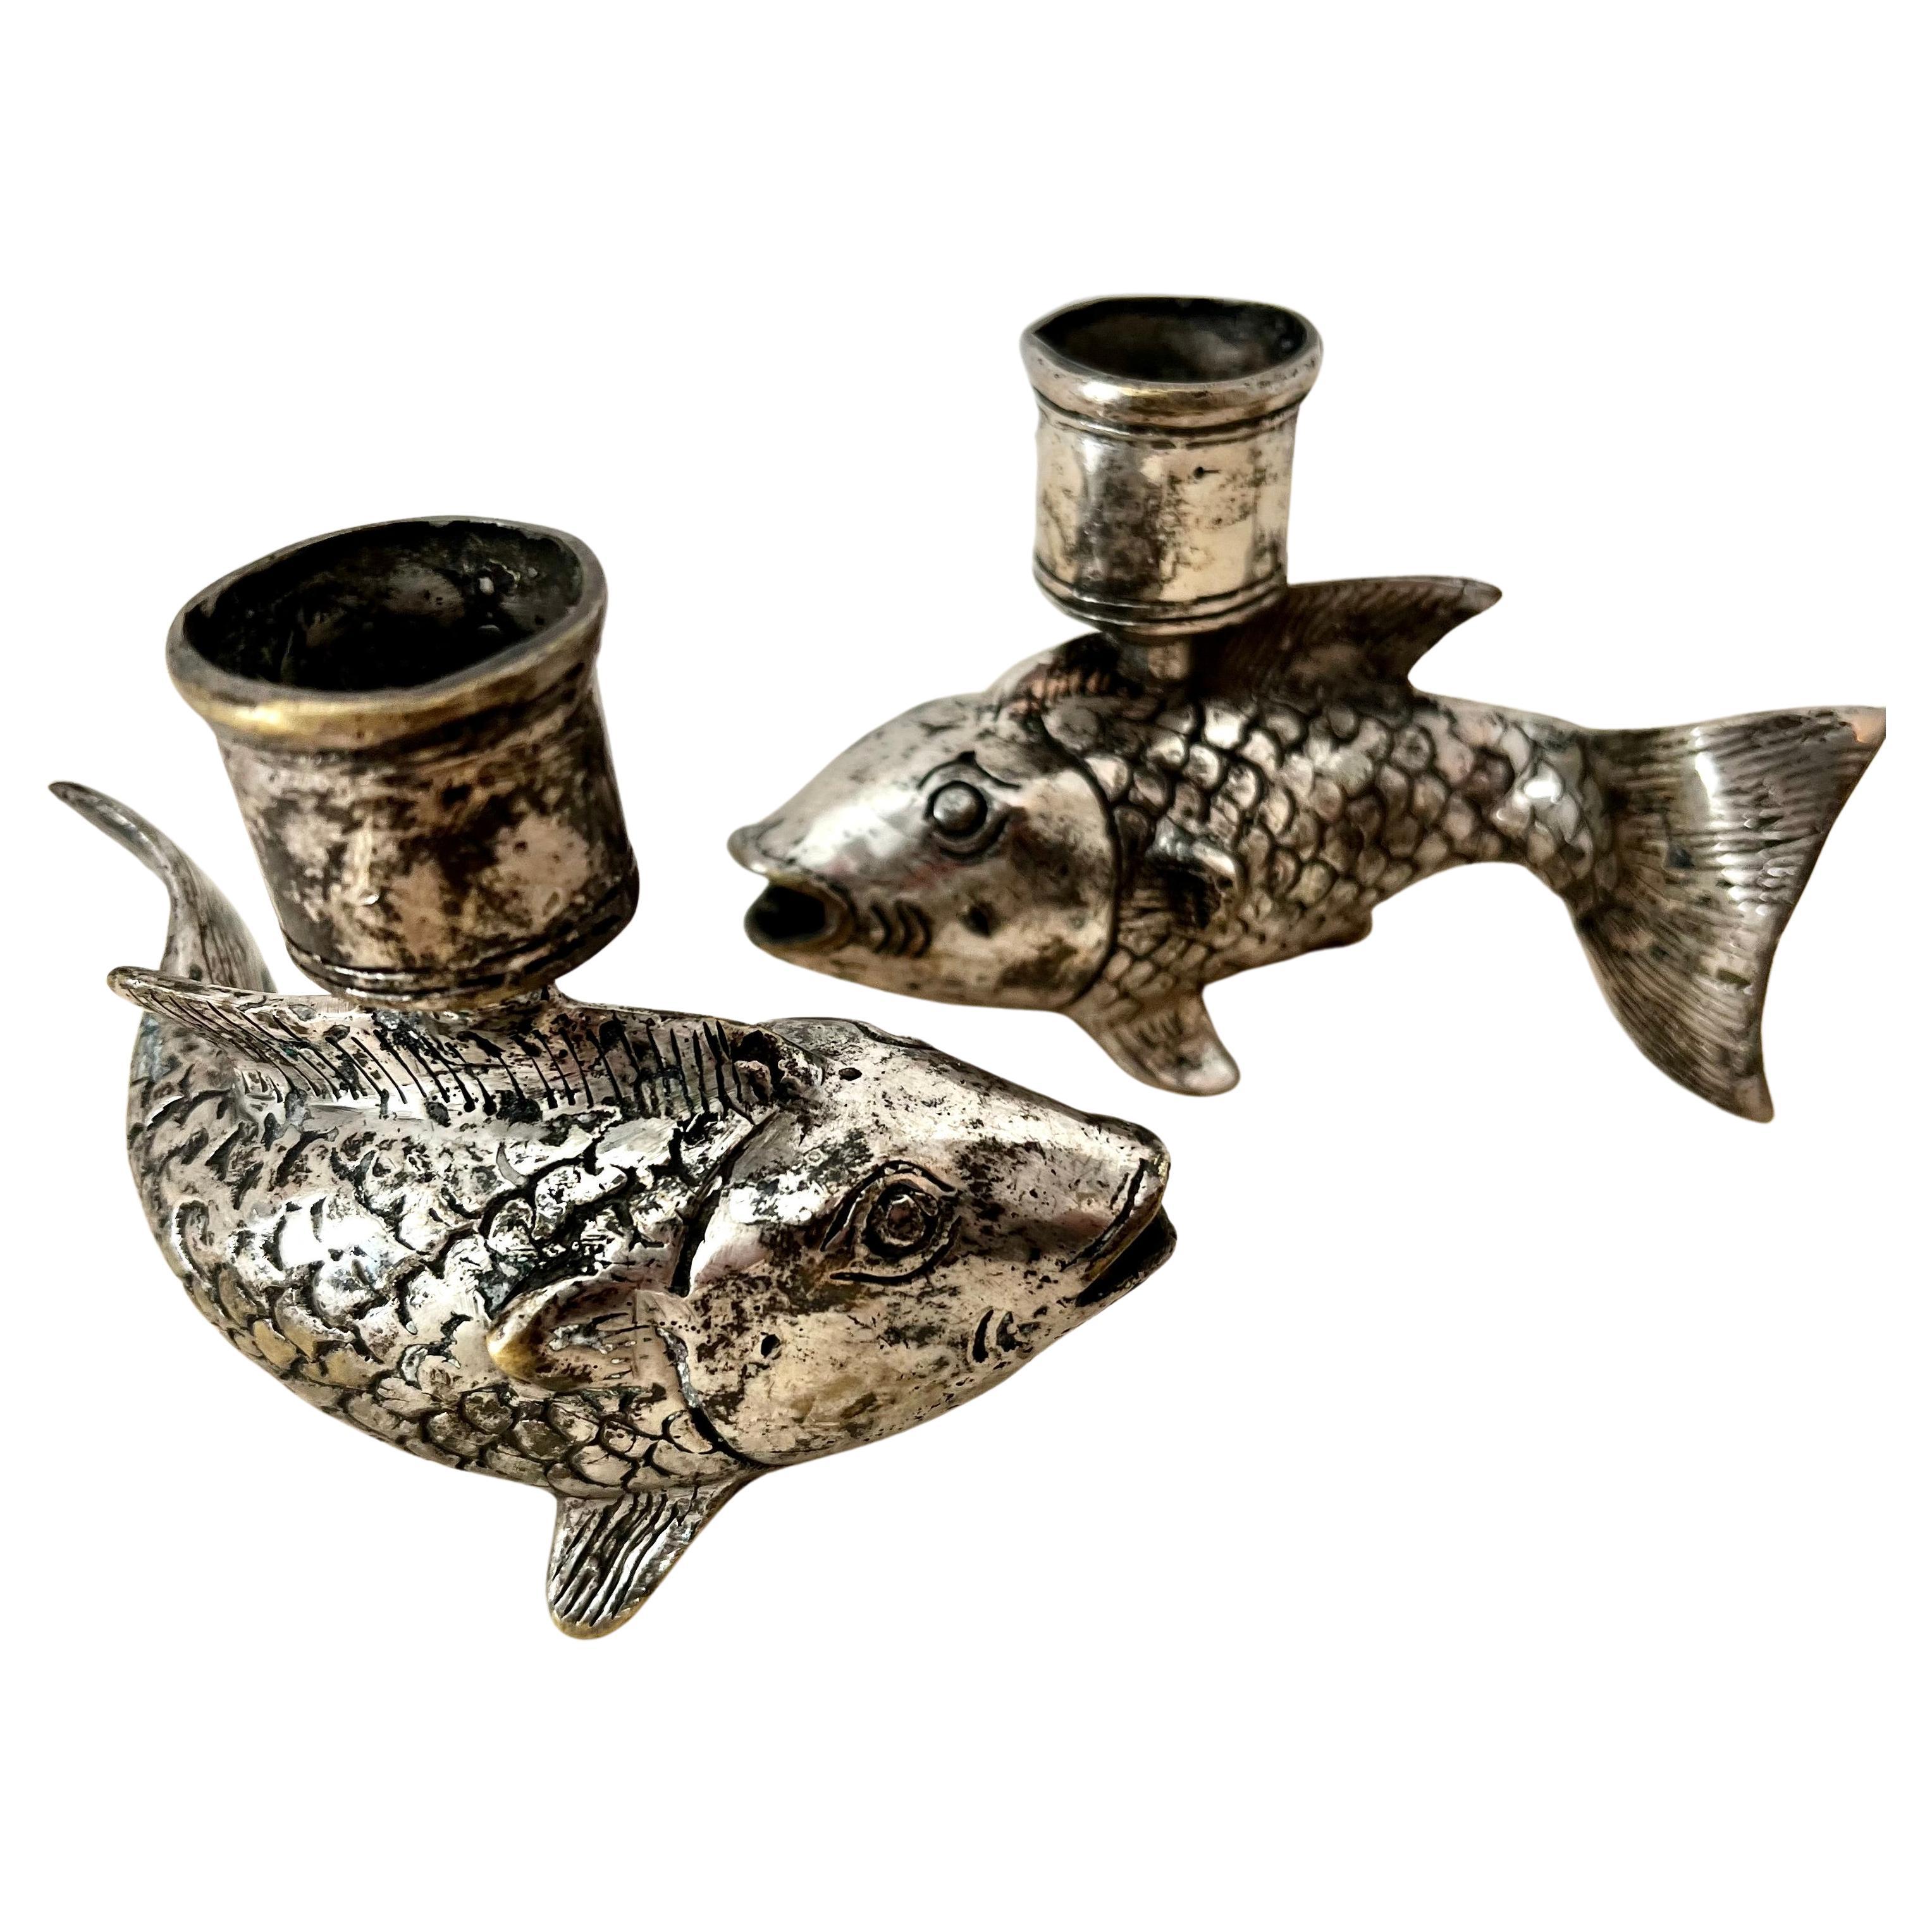 Pair of silver plate over brass candlesticks. A lovely pair of koi fish in a beautifully shaped design. The pair are low and wouldn't obstruct a casual to romantic dinner... or would be a compliment to a side, console or entry table with stack of